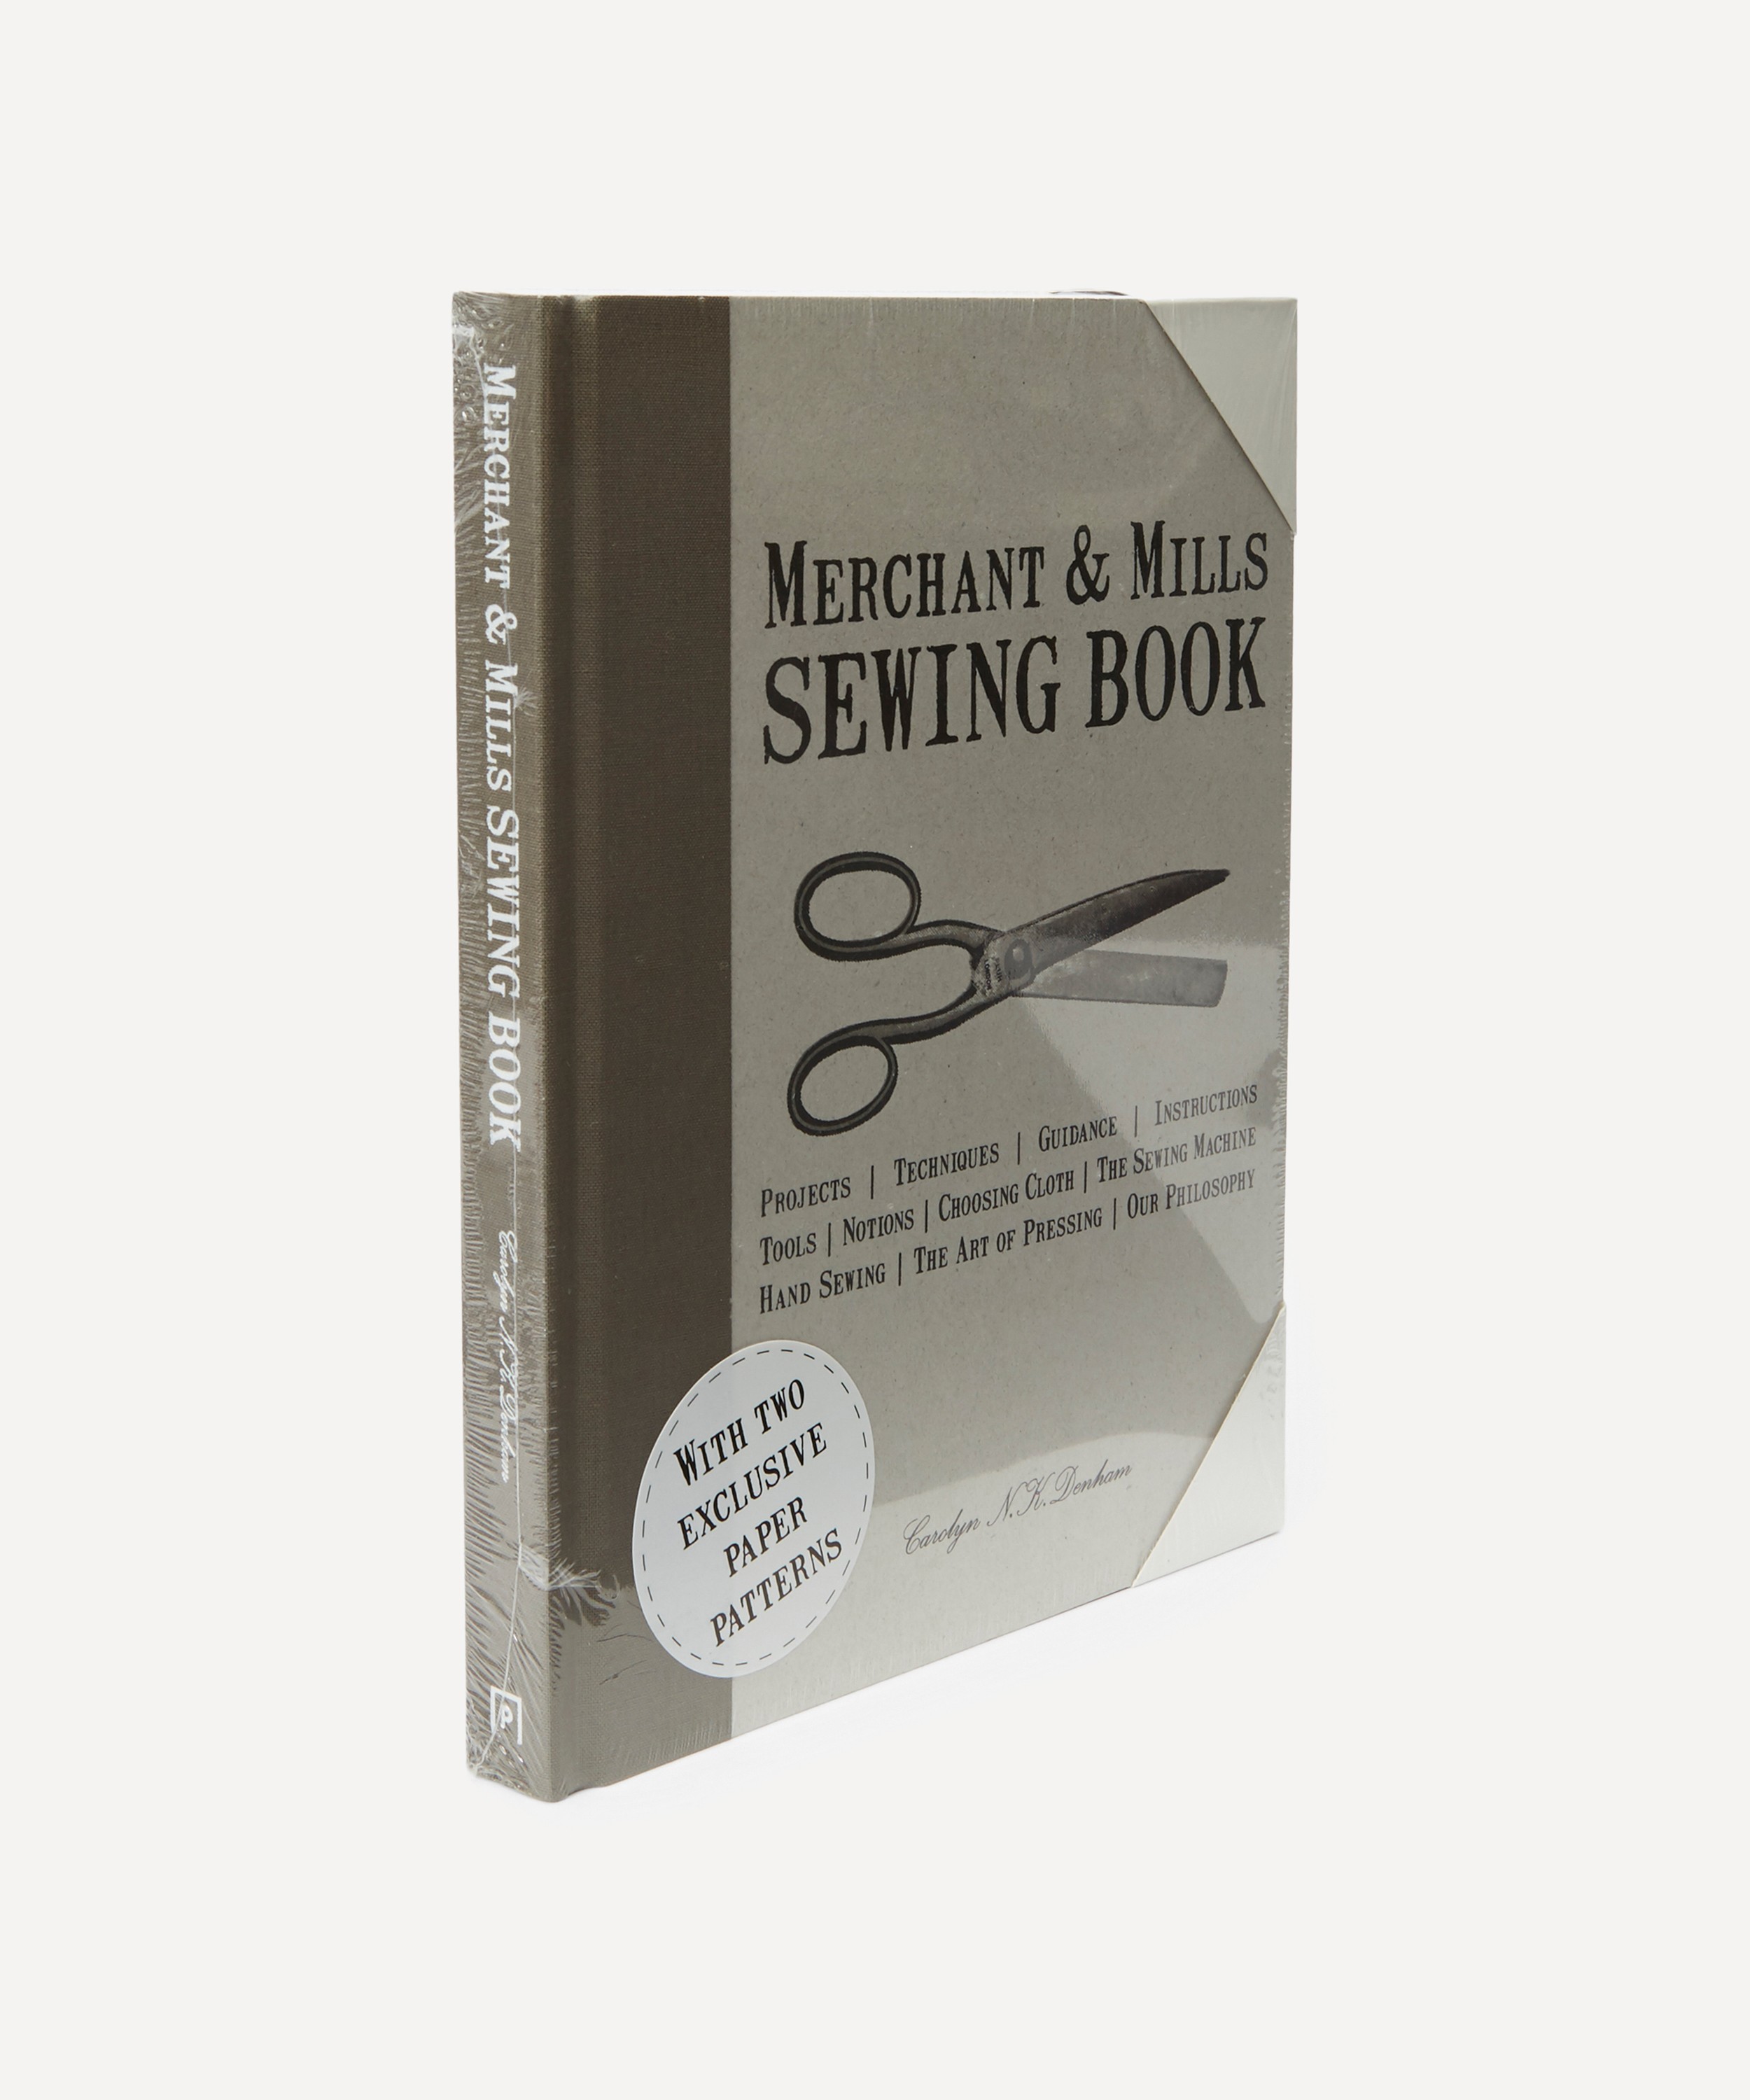 The Sewing Book by Merchant & Mills